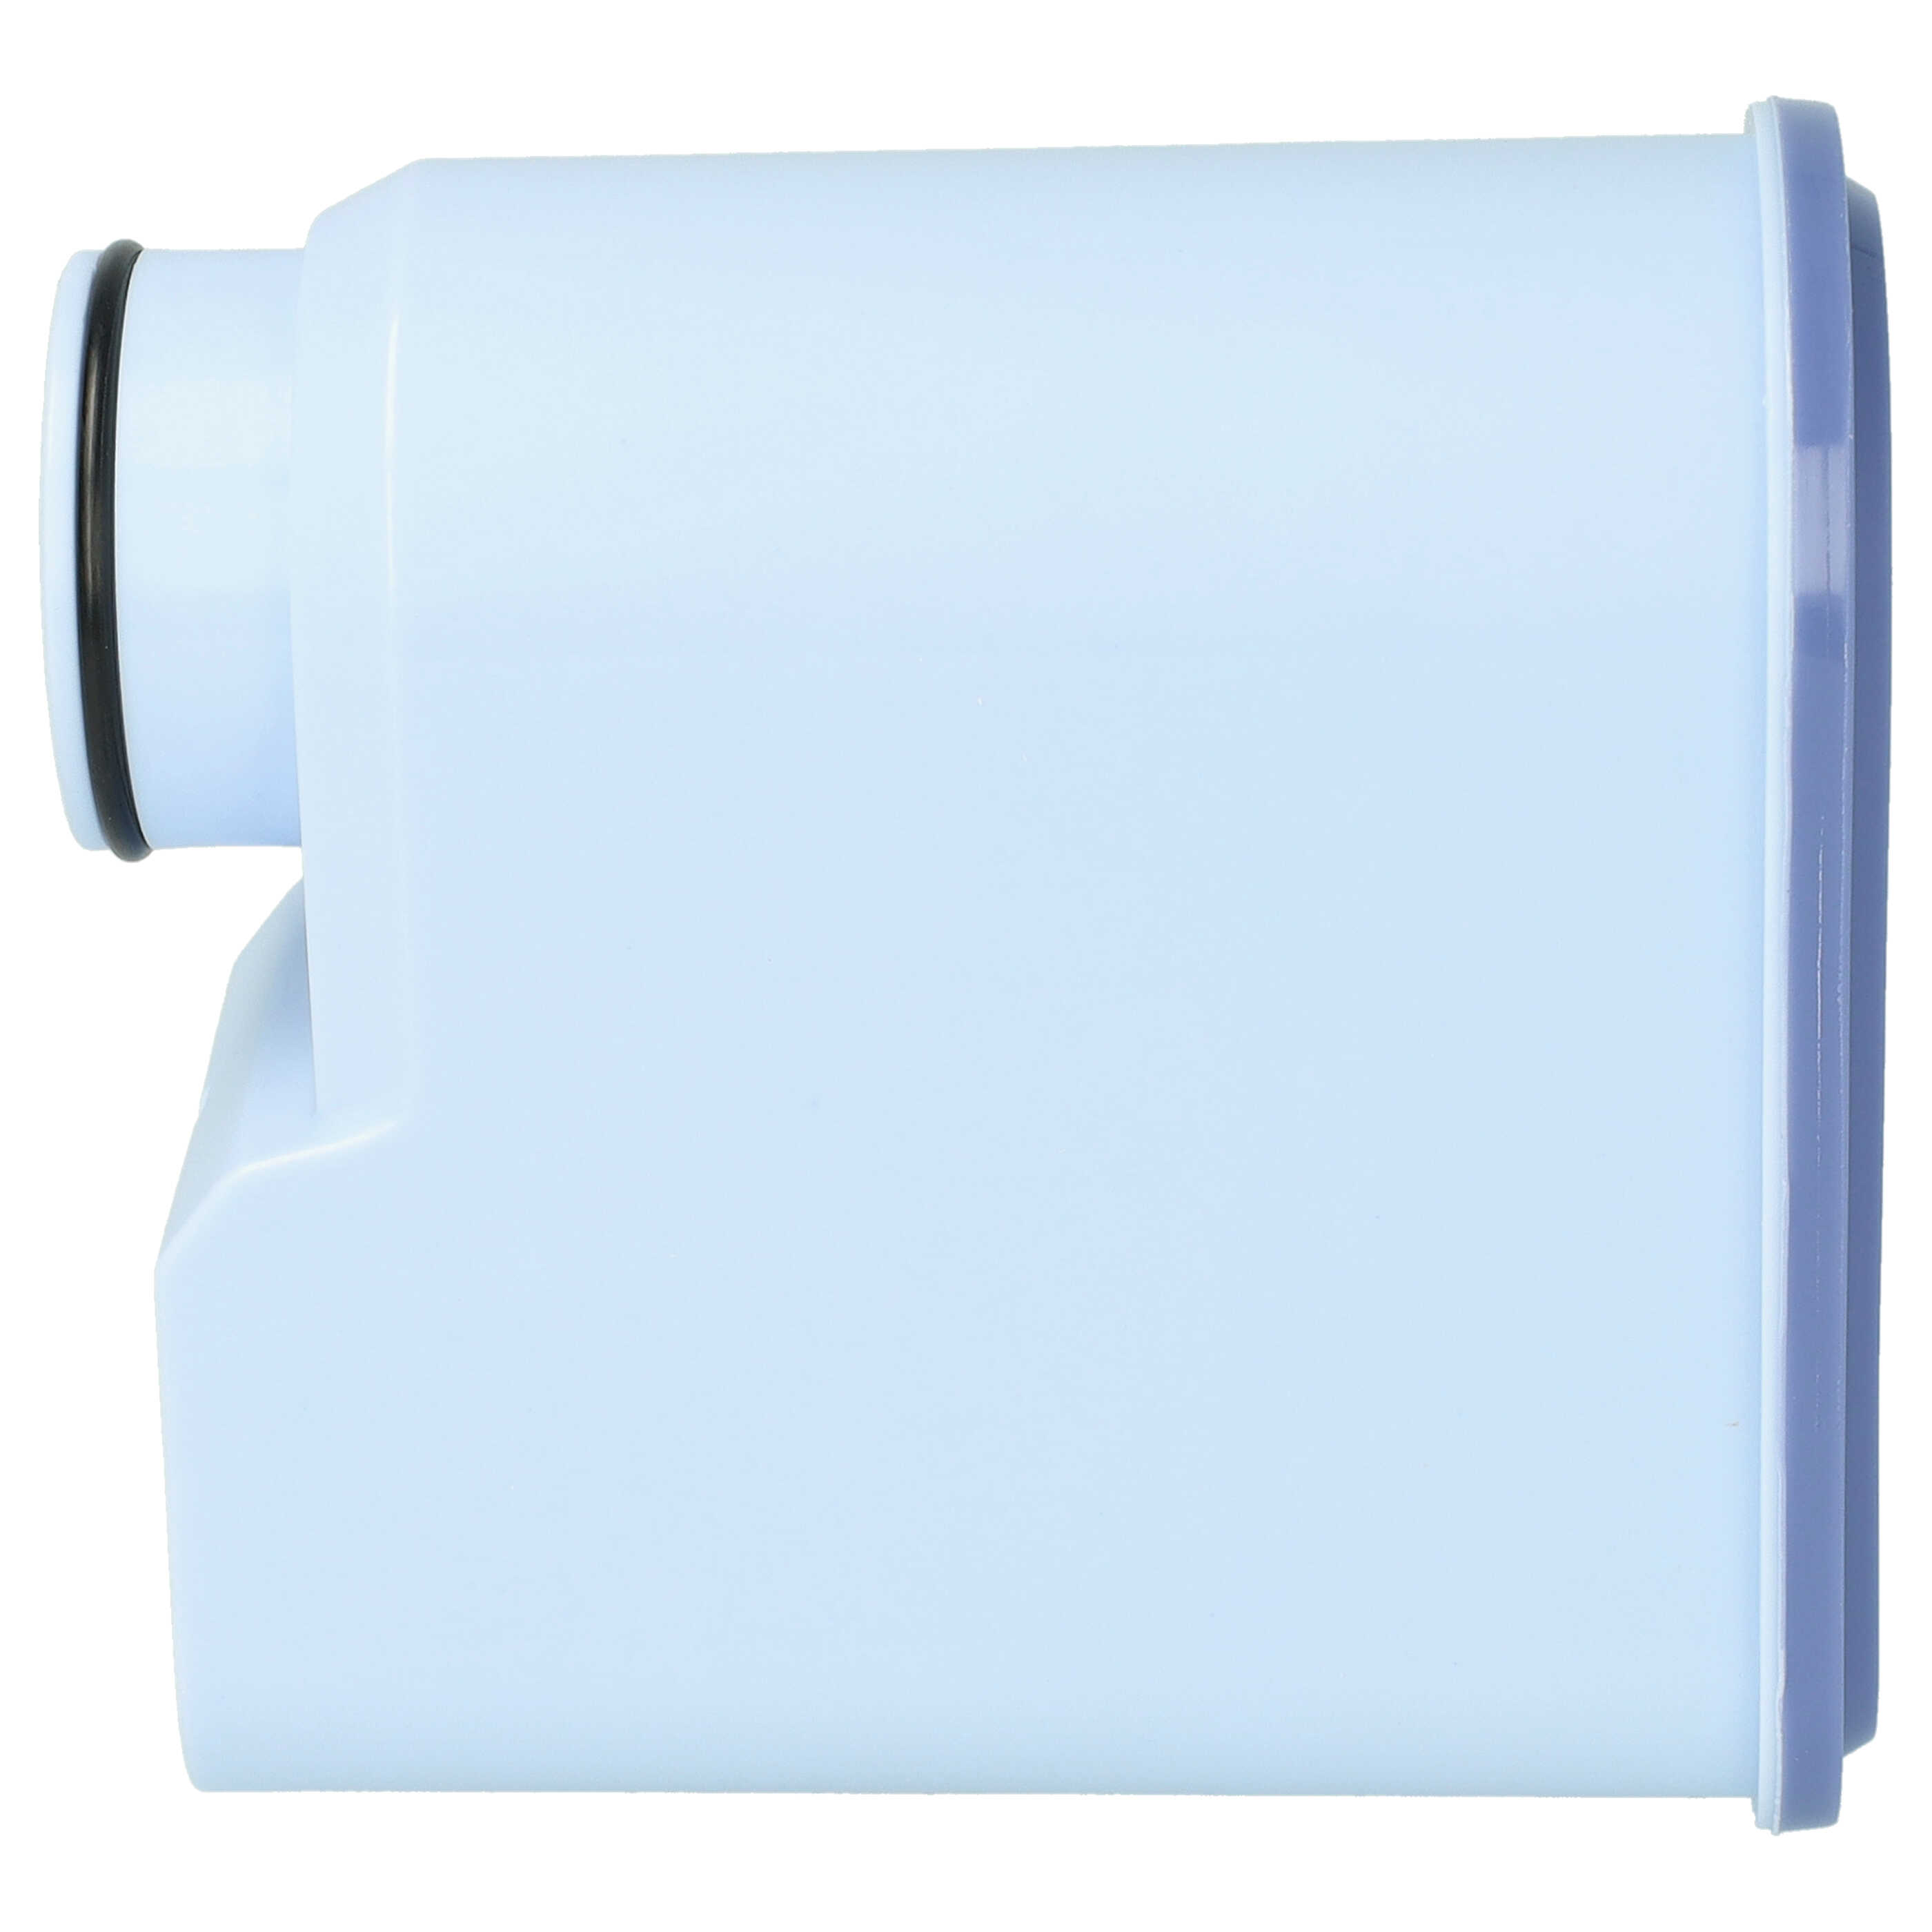 Water Filter replaces Philips AquaClean CA6903/10, CA6903/00 for Philips Coffee Machine etc. - Light Blue